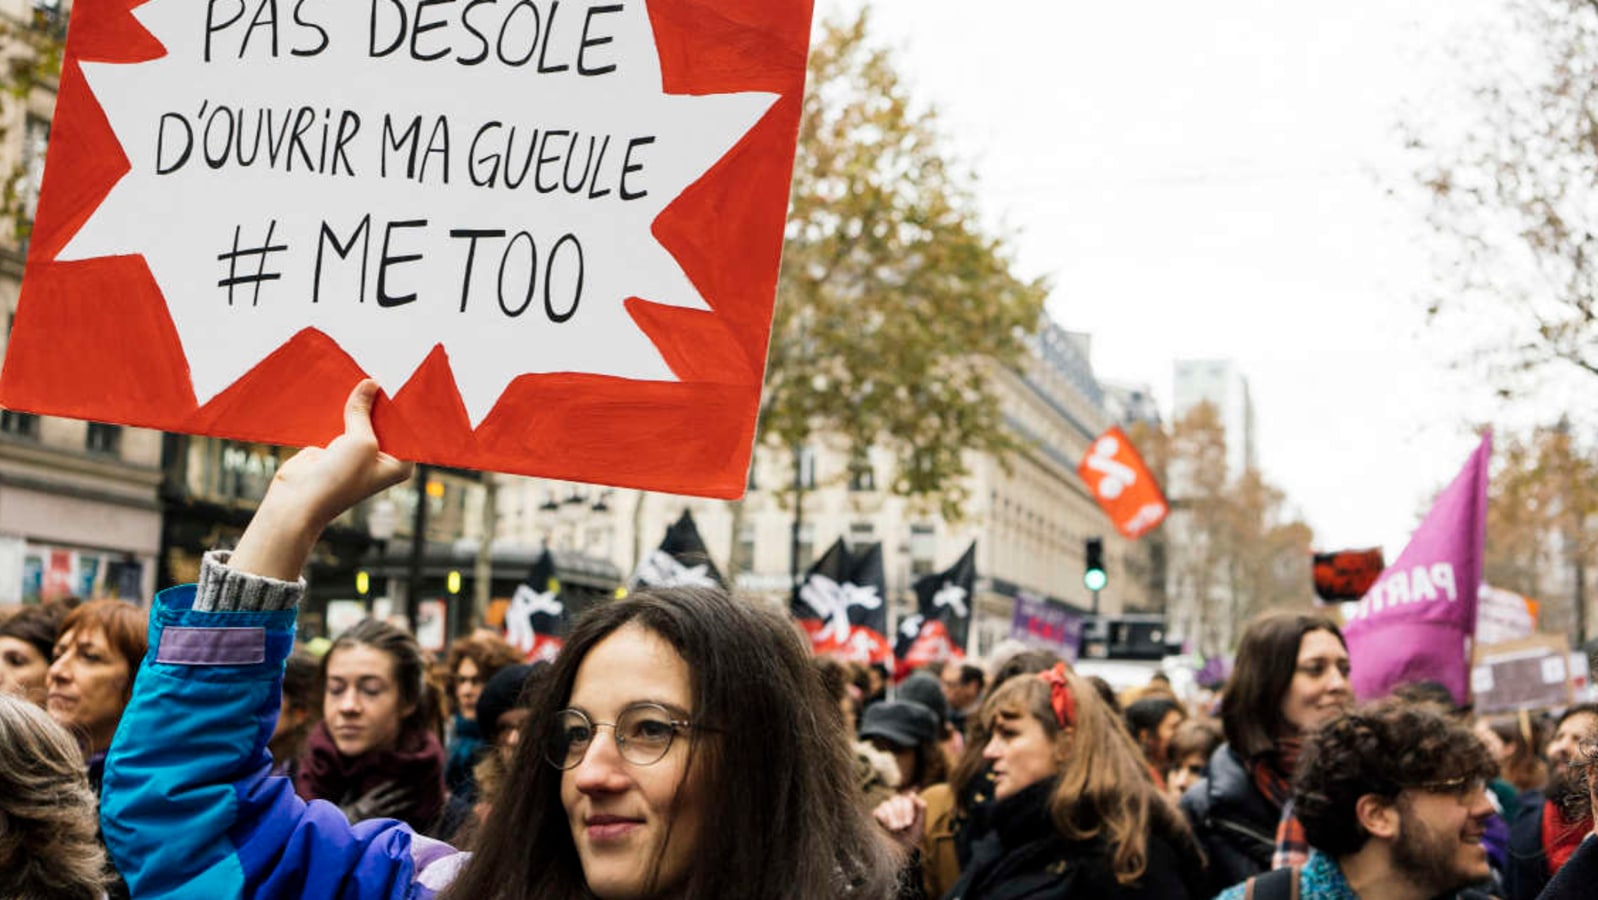 France is ‘very sexist’, says watchdog body report